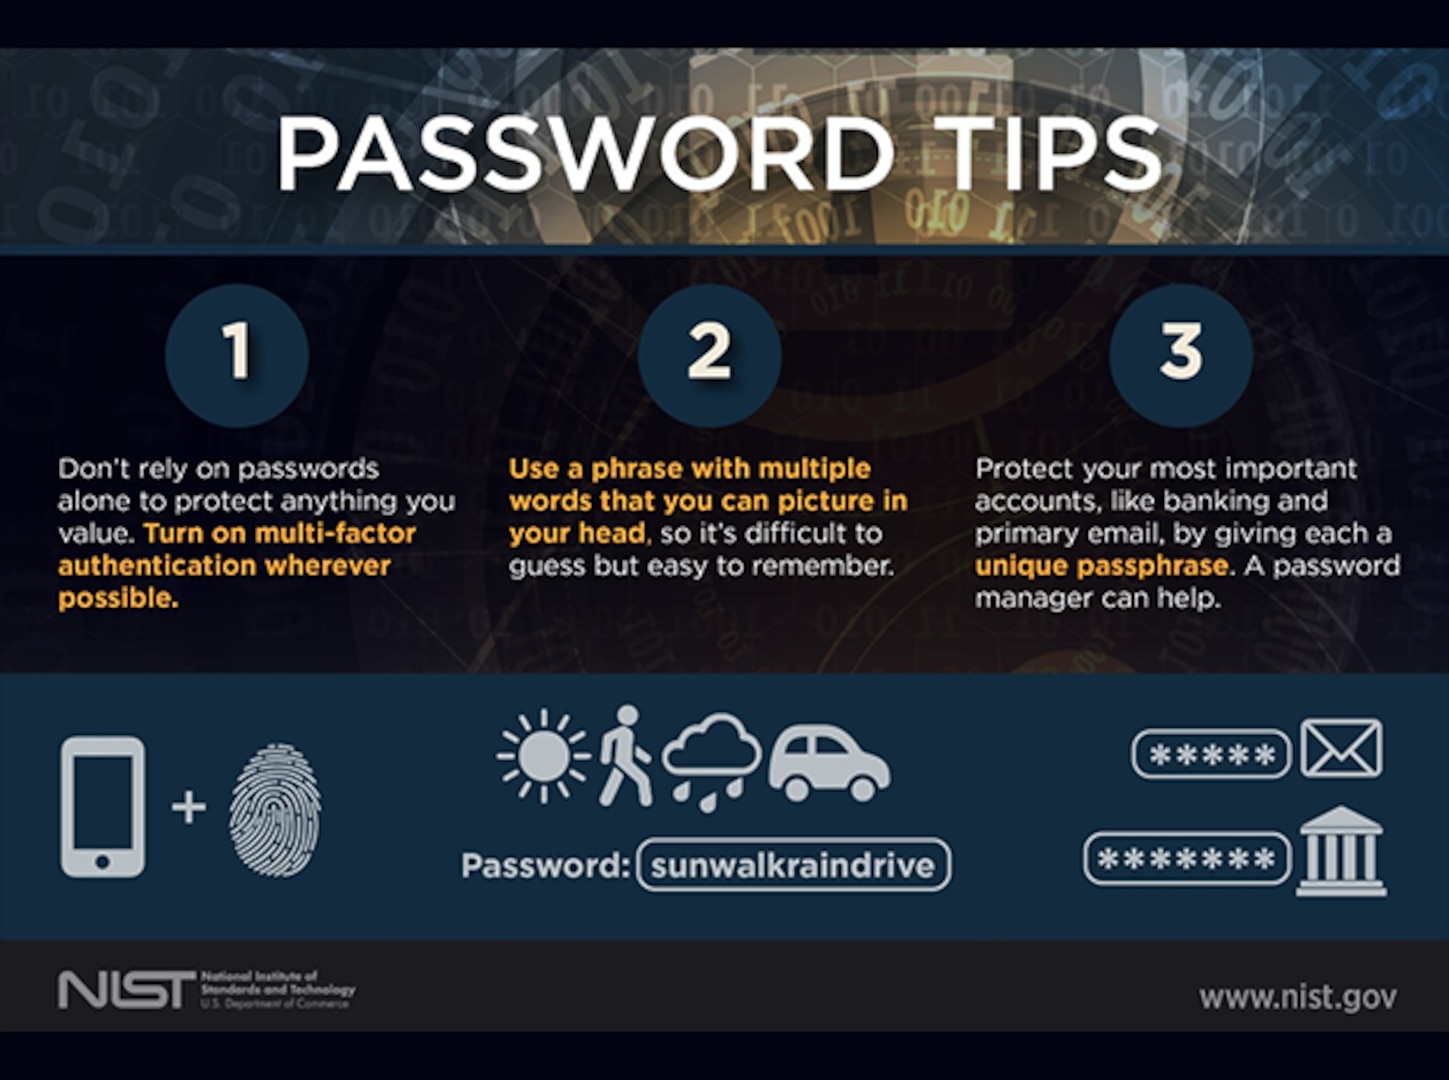 Tips for Creating a Strong Password to Improve Internet Security